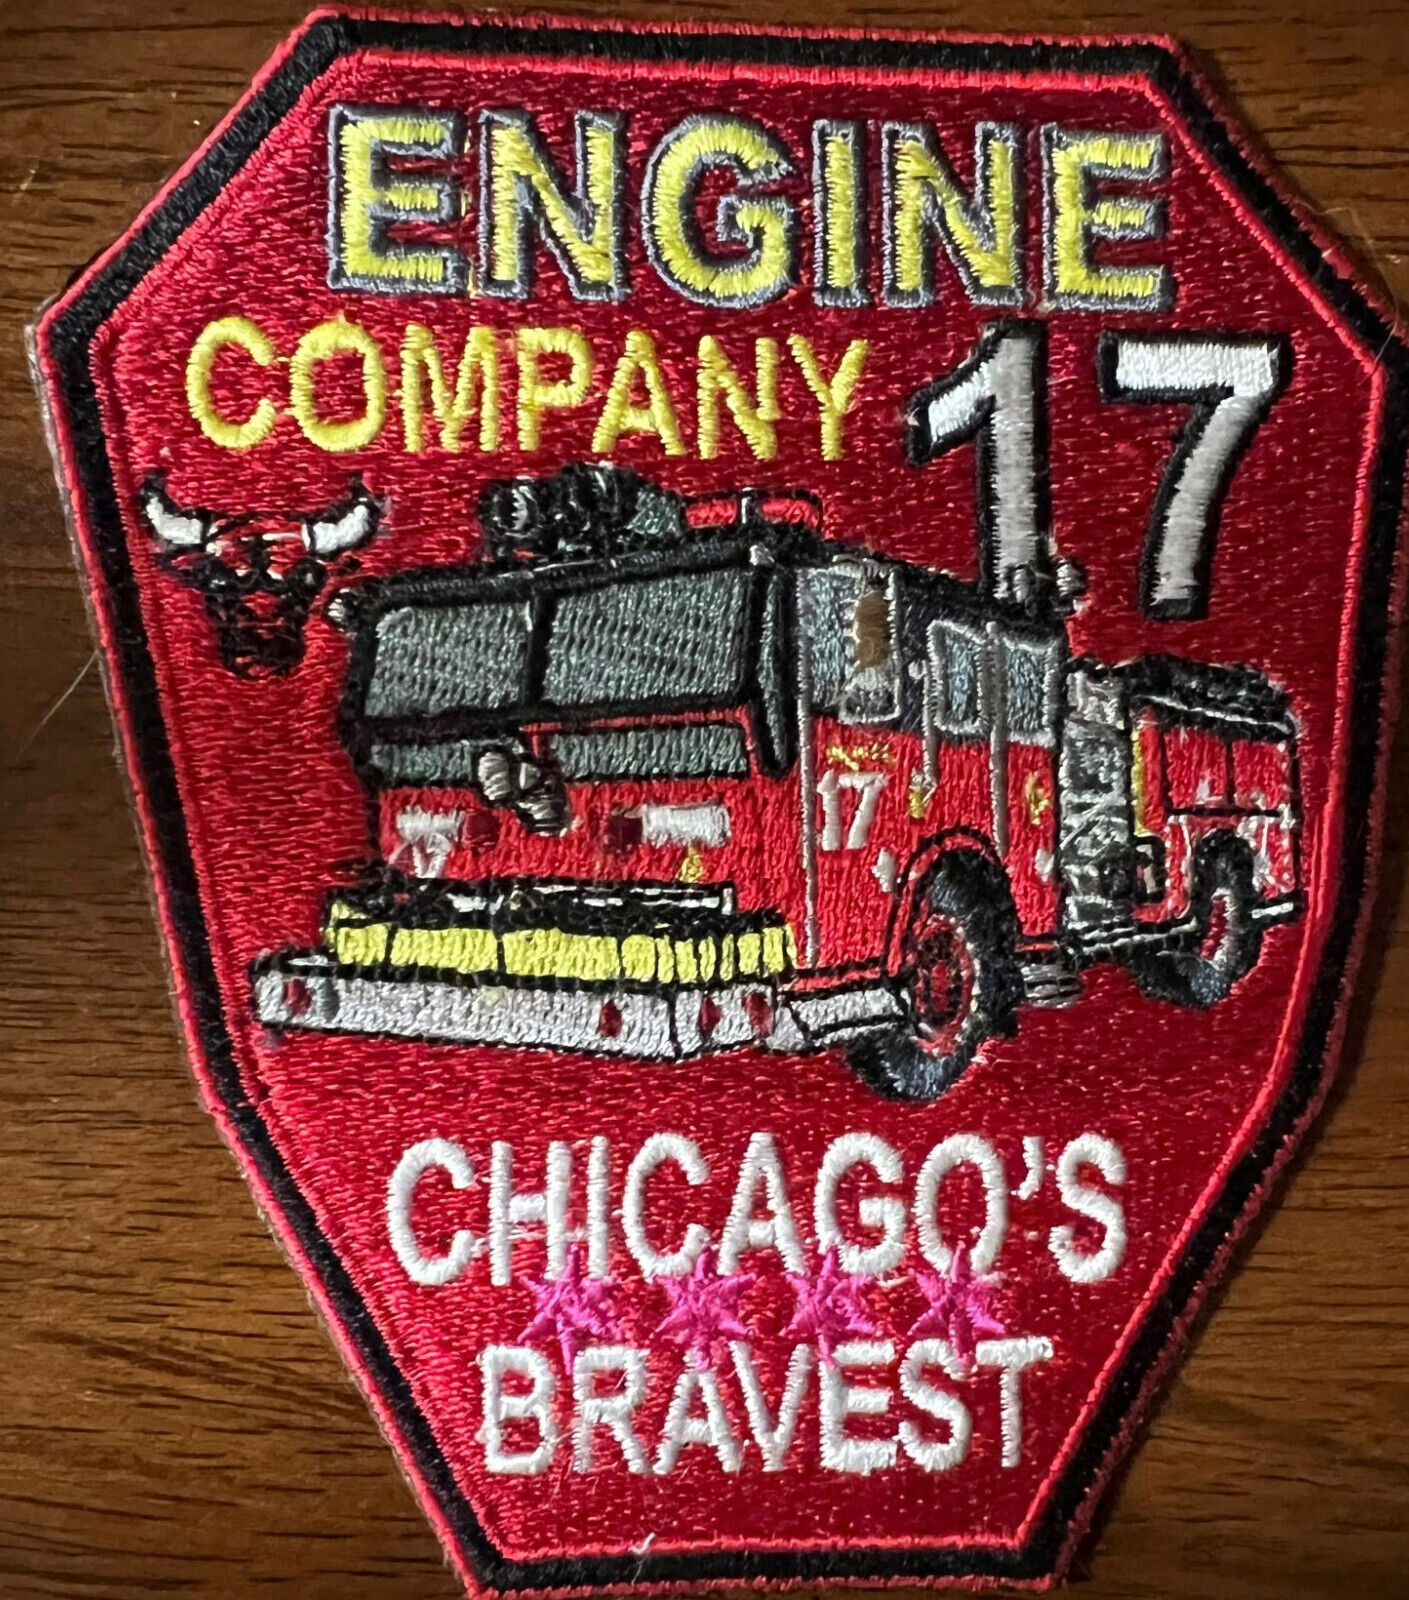 CHICAGO FIRE DEPT ENGINE COMPANY 17 PATCH CHICAGO'S BRAVEST - NEW